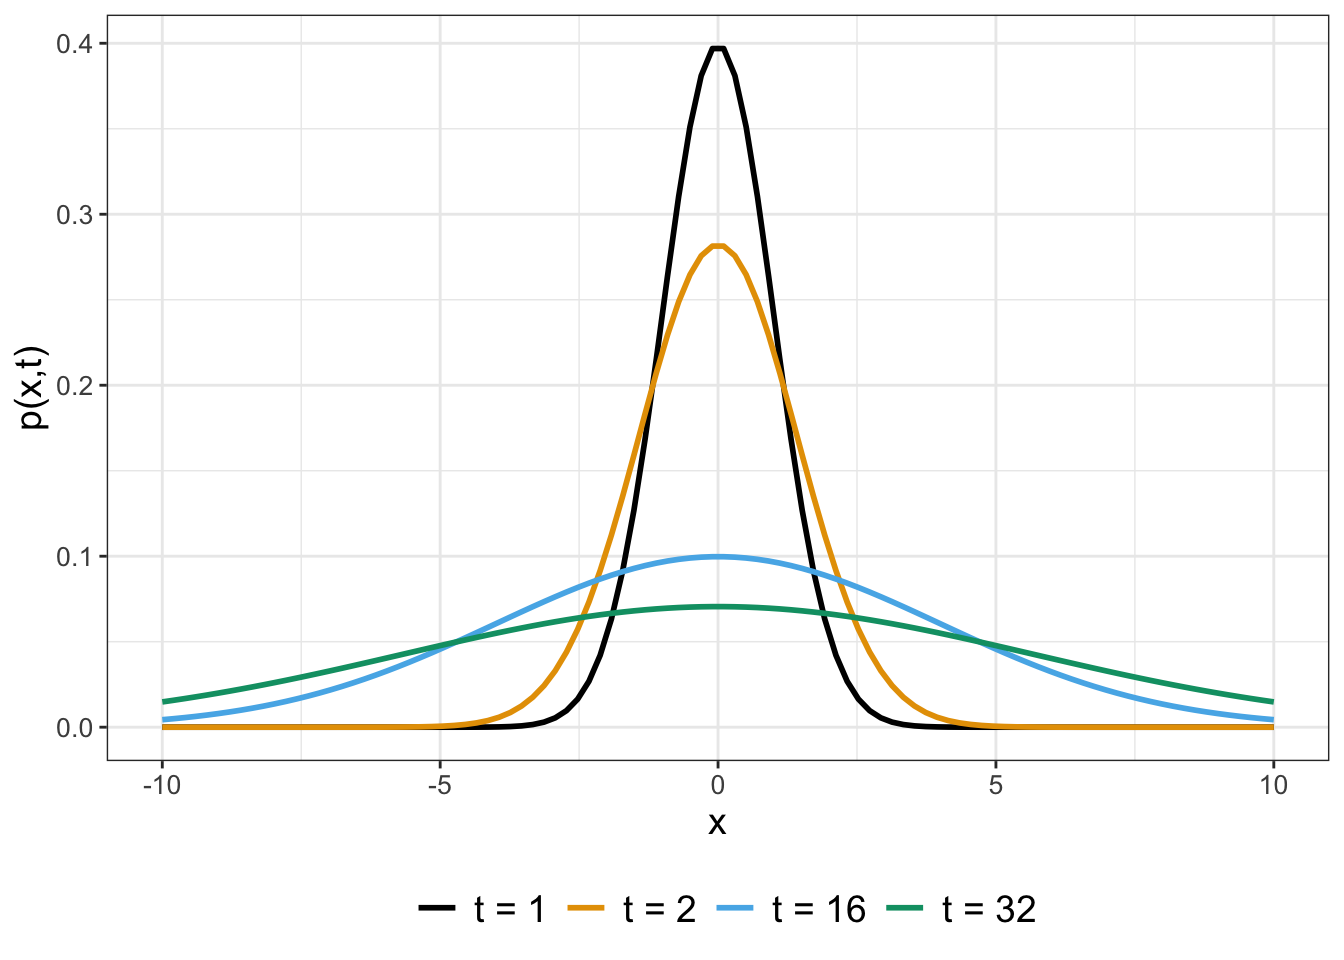 Profiles of $p(x,t)$ (Equation \@ref(eq:diff-eq-soln)) for different values of $t$ with $D = 0.5$.